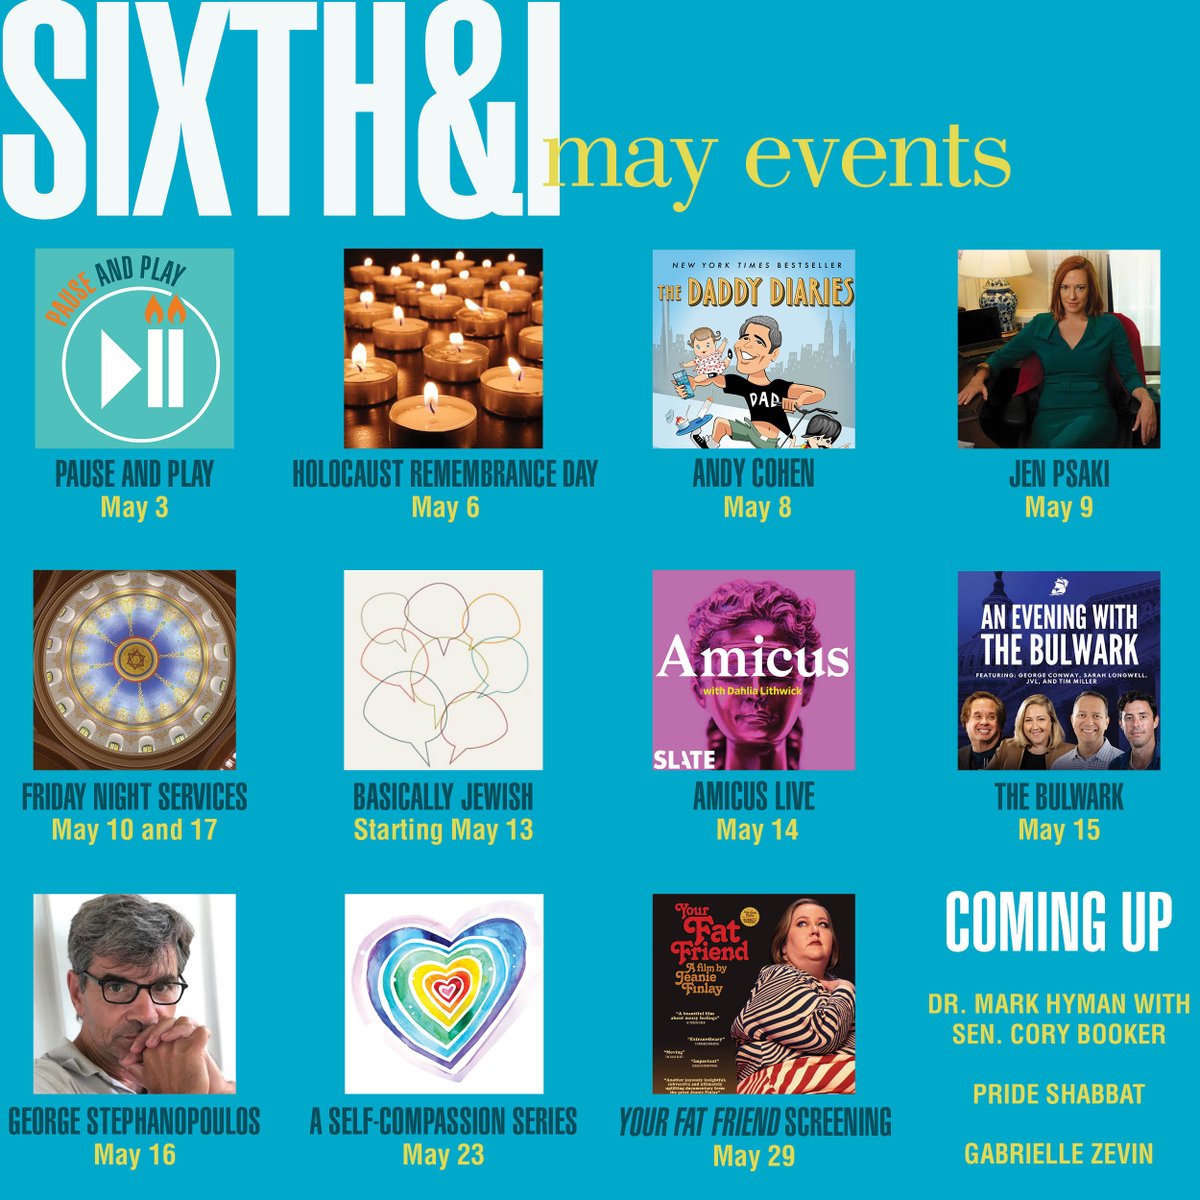 A quick look at everything happening at Sixth & I this month. Tickets: bit.ly/4b00TB4 @Andy @RobertGarcia @3G_DC @jrpsaki @karaswisher @PoliticsProse @Dahlialithwick @JVLast @SarahLongwell25 @gtconway3d @Timodc @GStephanopoulos @jmart @yrfatfriendfilm @JeanieFinlay